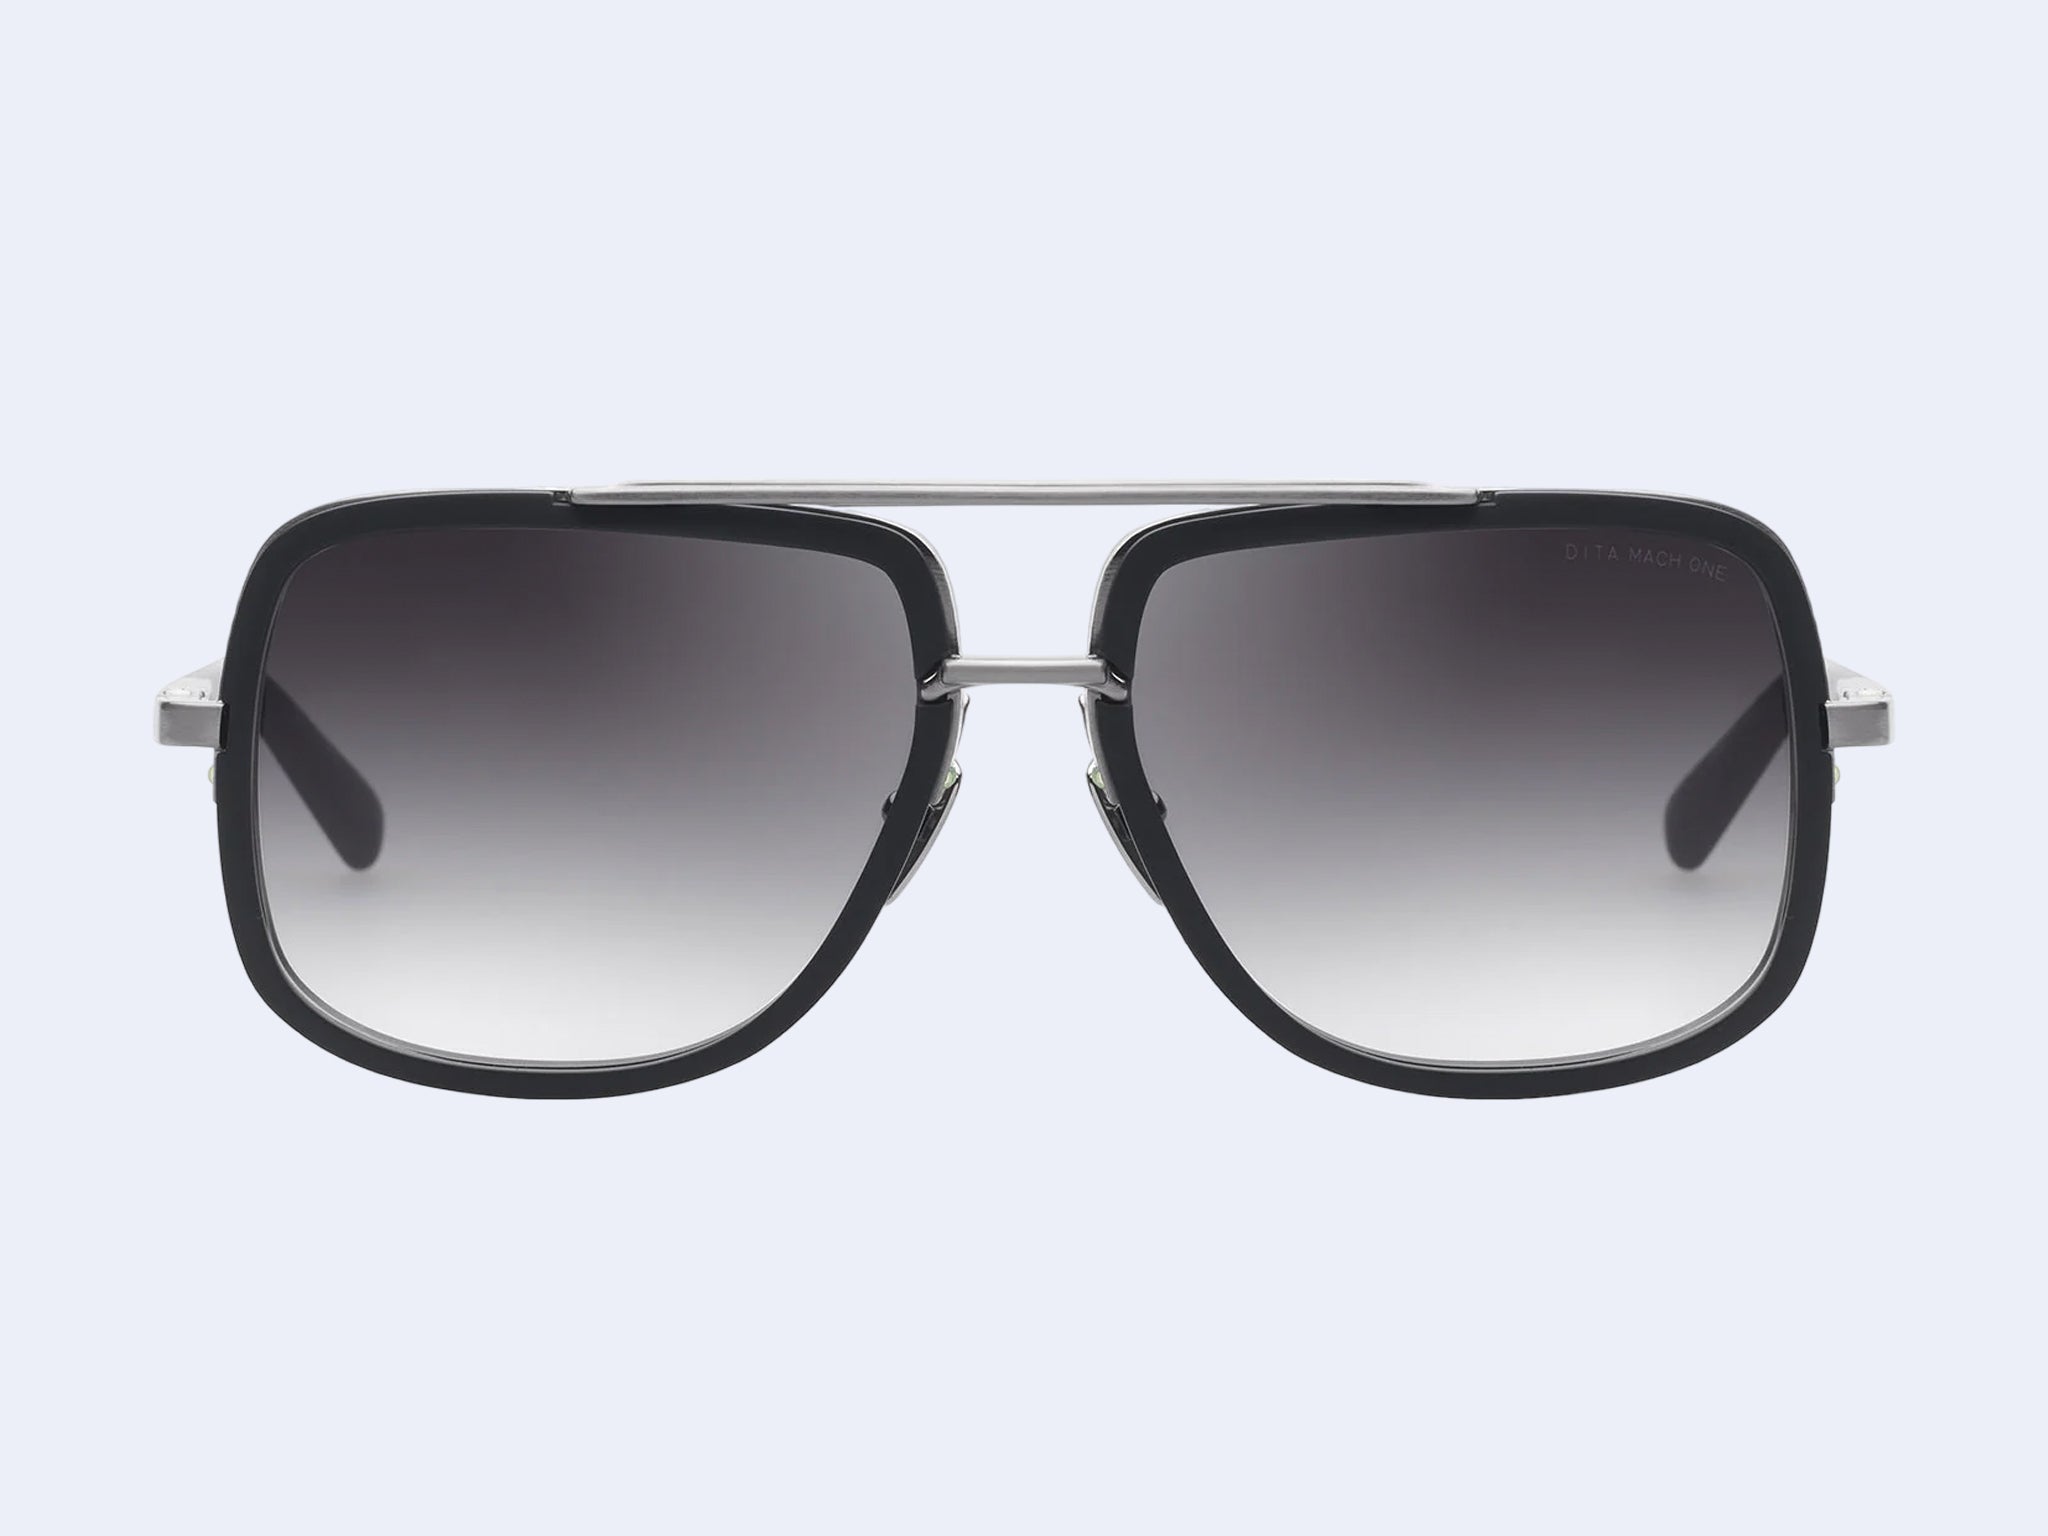 Dita Mach-One Sunglasses | FREE Shipping - Go-Optic.com - SOLD OUT